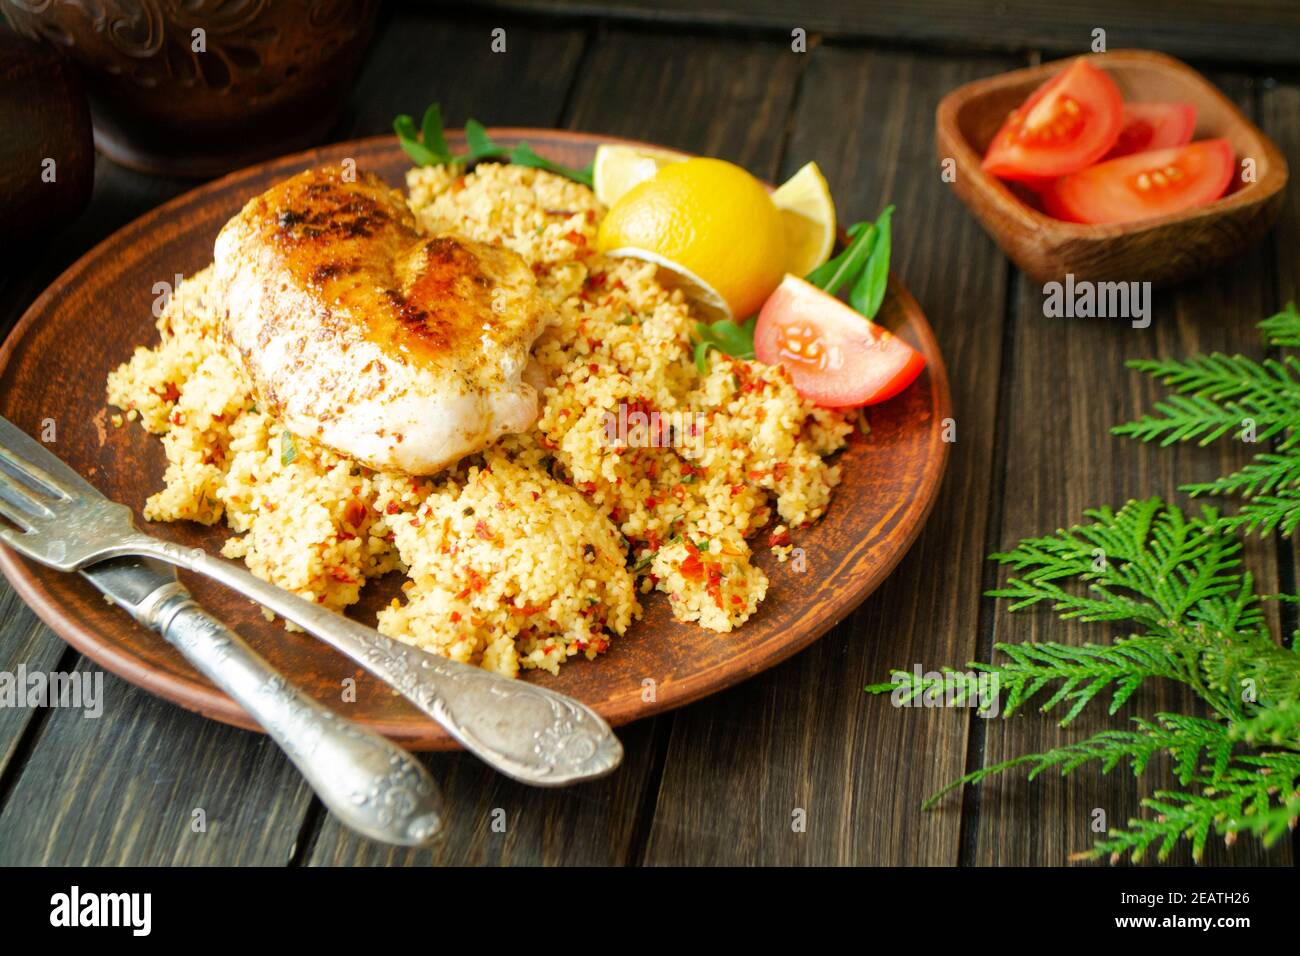 Cous Cous, chicken and vegetables on dark wooden table Stock Photo